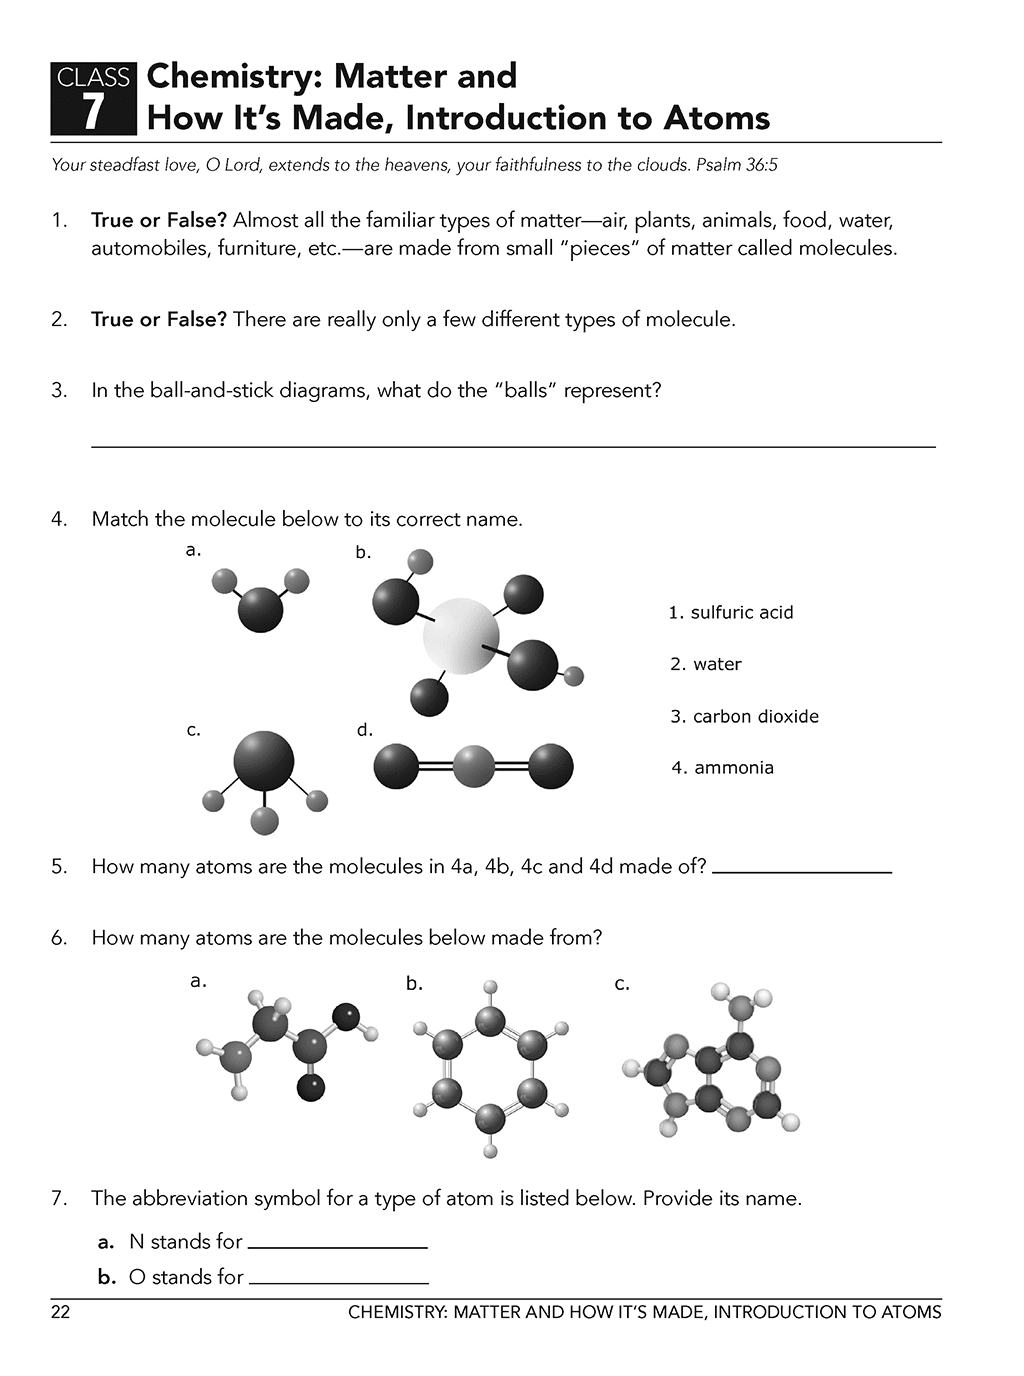 4th grade homeschool Physical Science Workbook Level B class 7 sample page 1